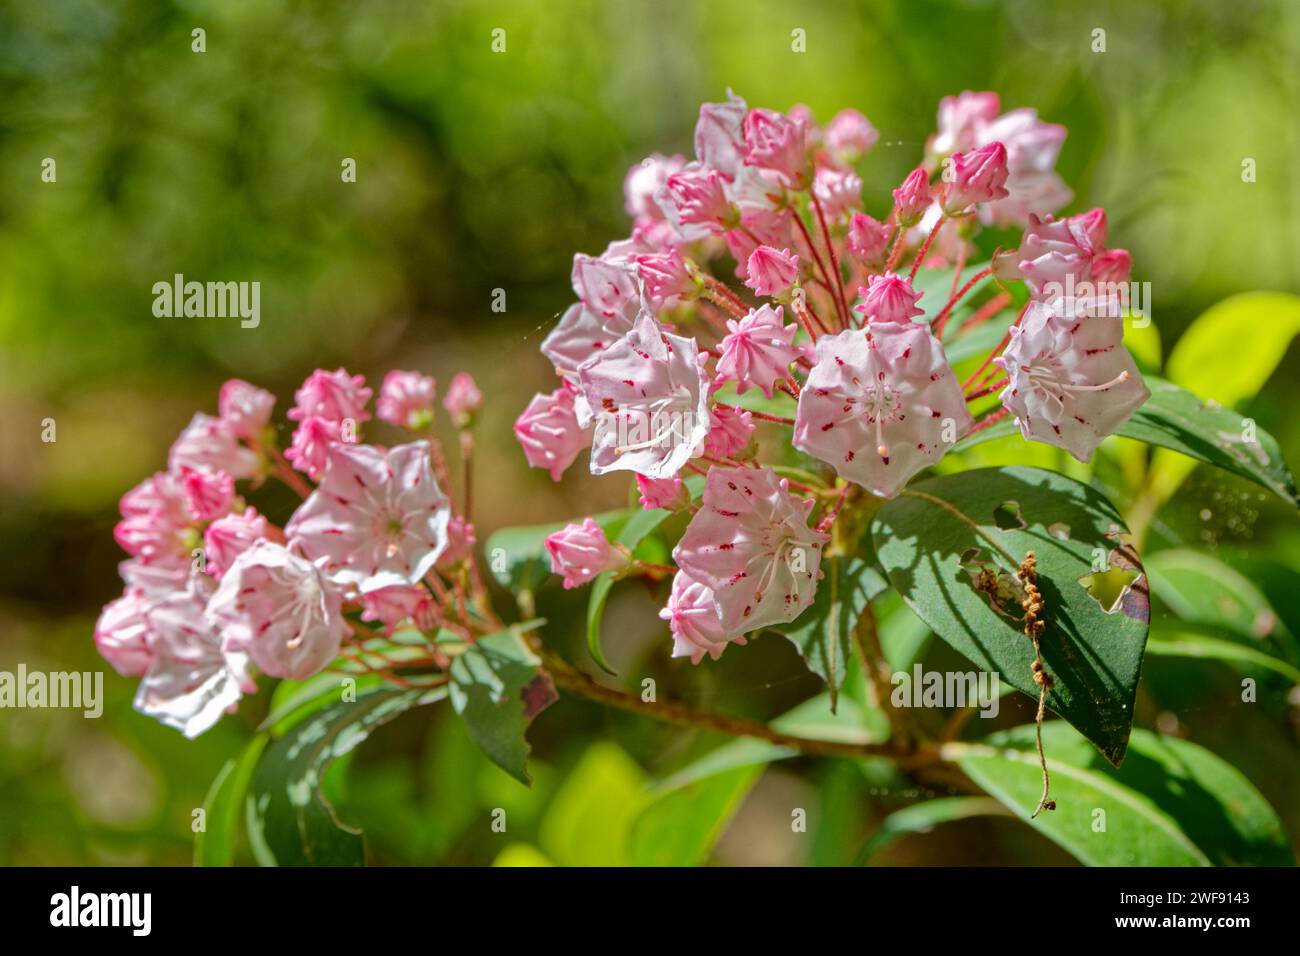 Closeup view of a branch with clusters of pink flowers on a mountain laurel bush just starting to bloom on a bright sunny day in springtime Stock Photo